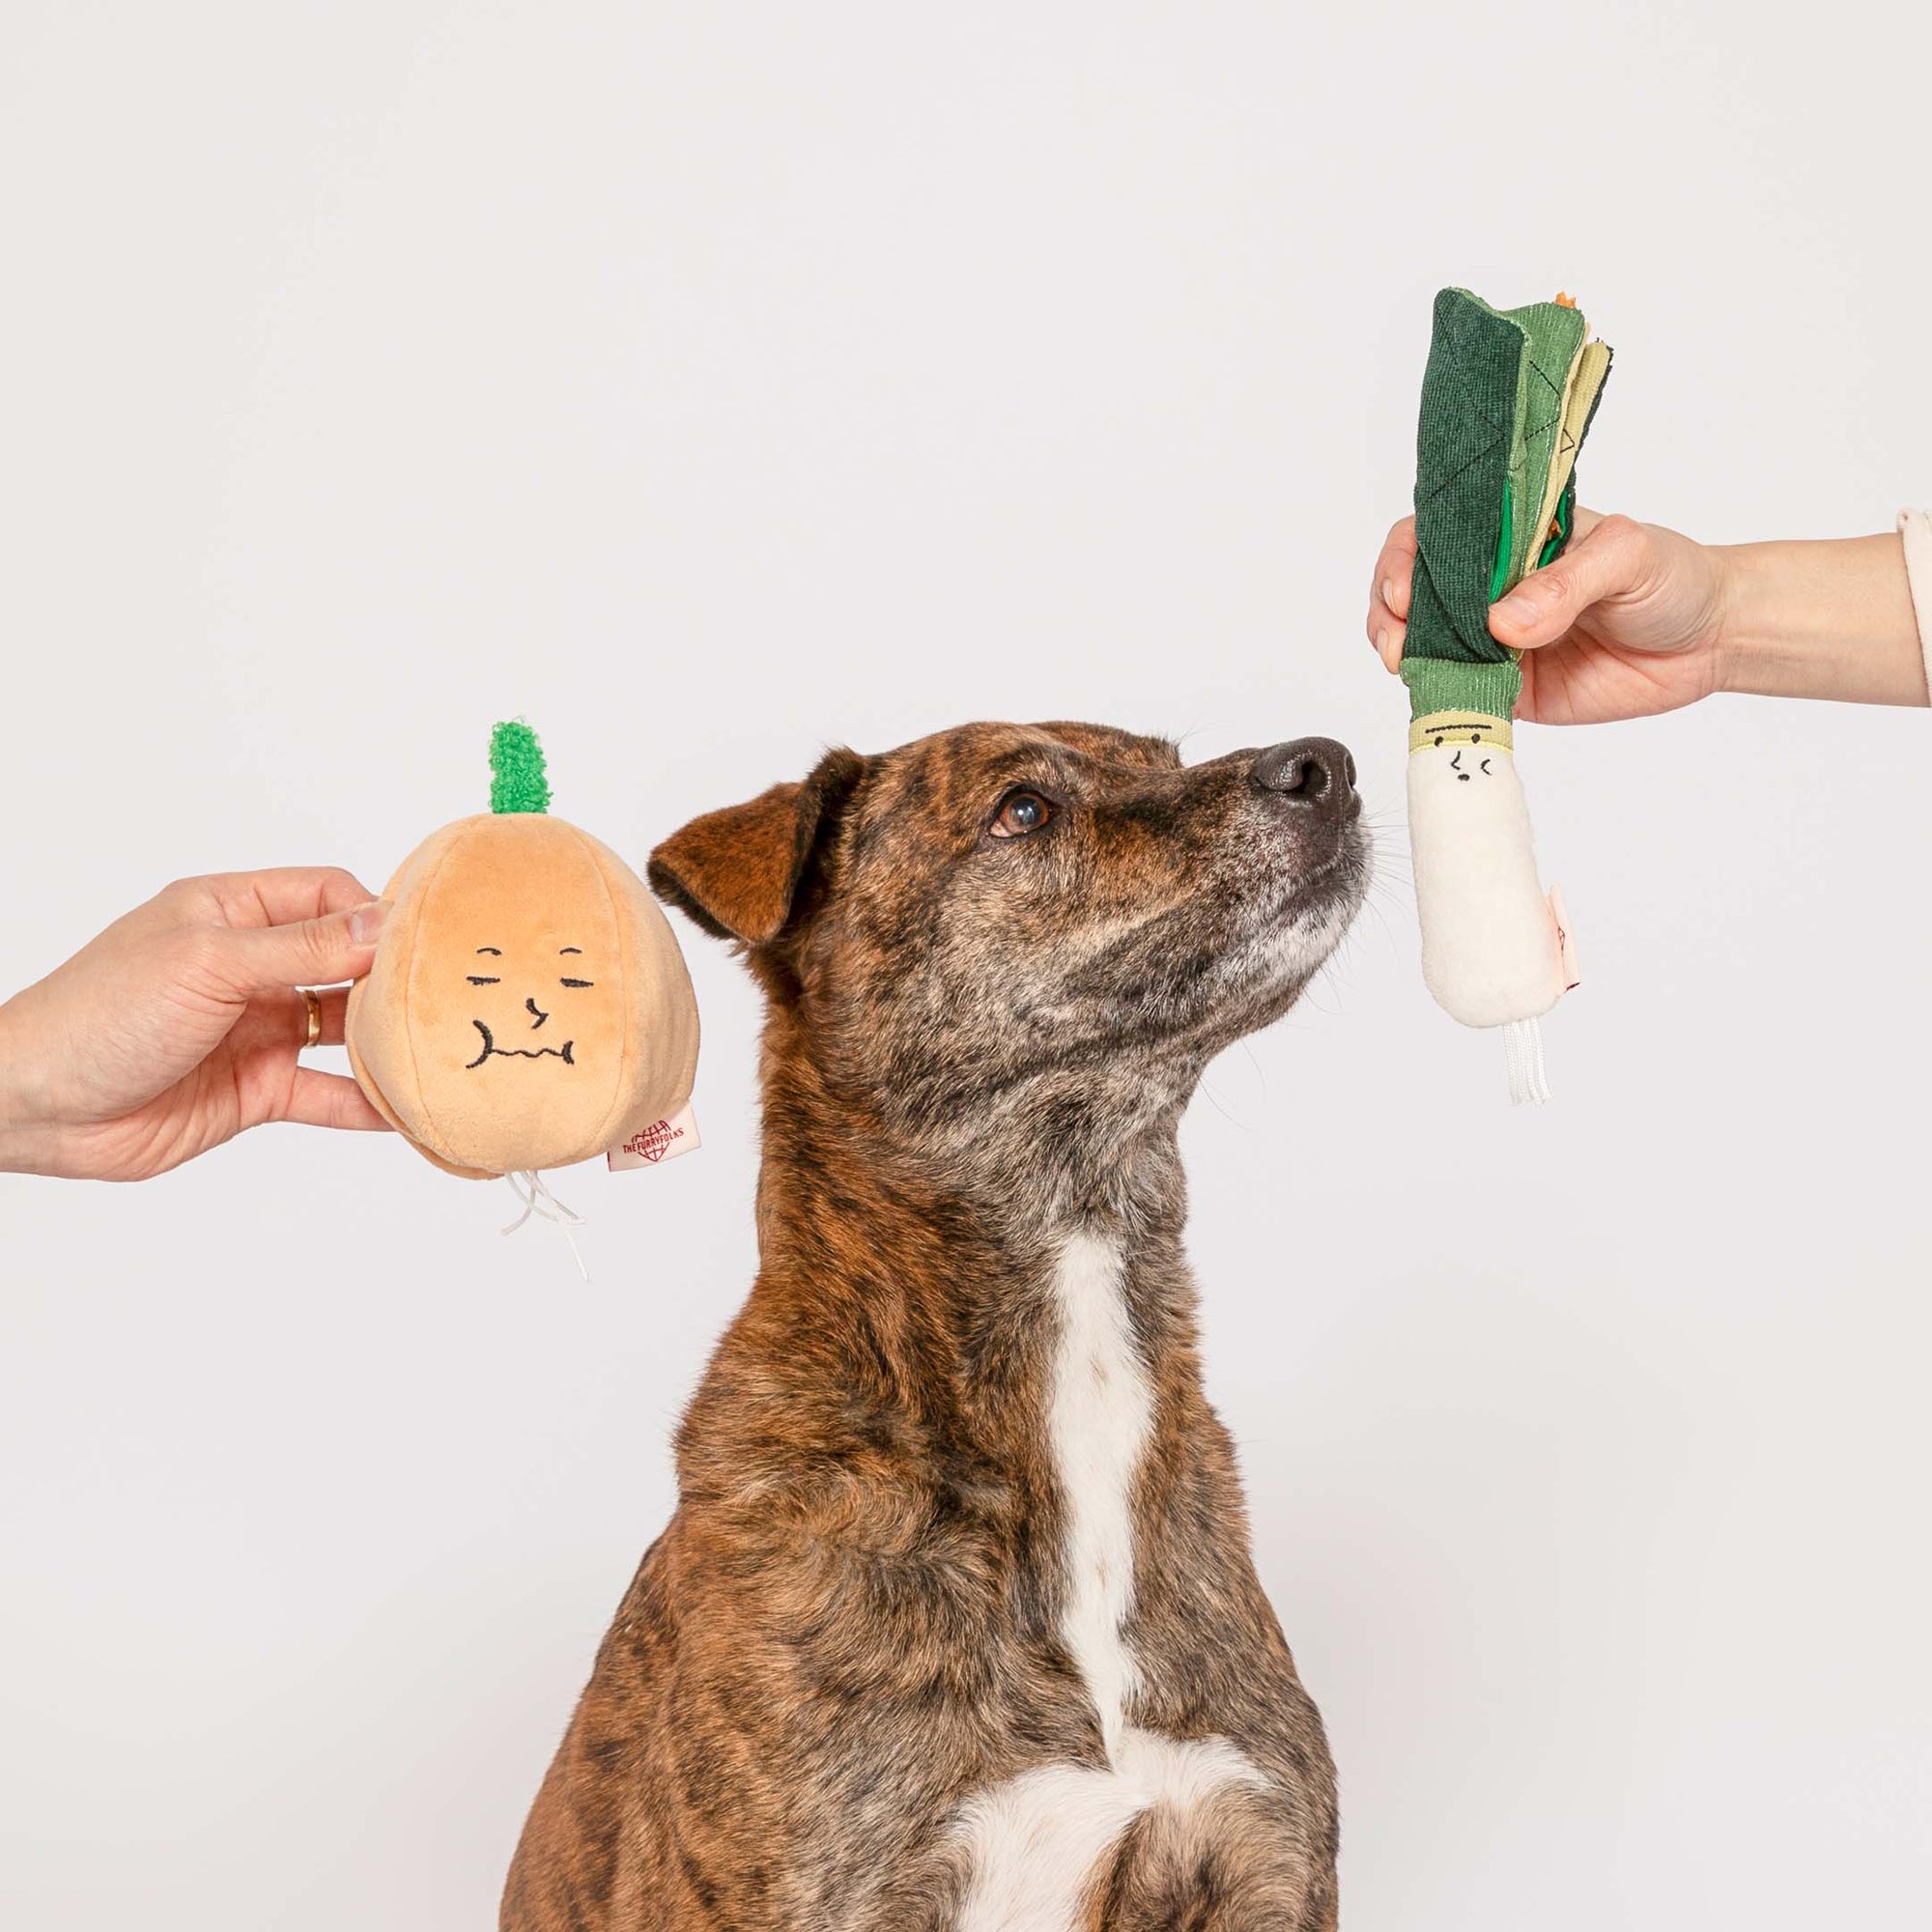 This image depicts a brindle dog looking attentively at a green onion-shaped plush toy being presented by a human hand, while another hand holds a yellow onion-shaped toy beside it. The dog's gaze directed towards the toys indicates interest and the potential for a playful interaction.